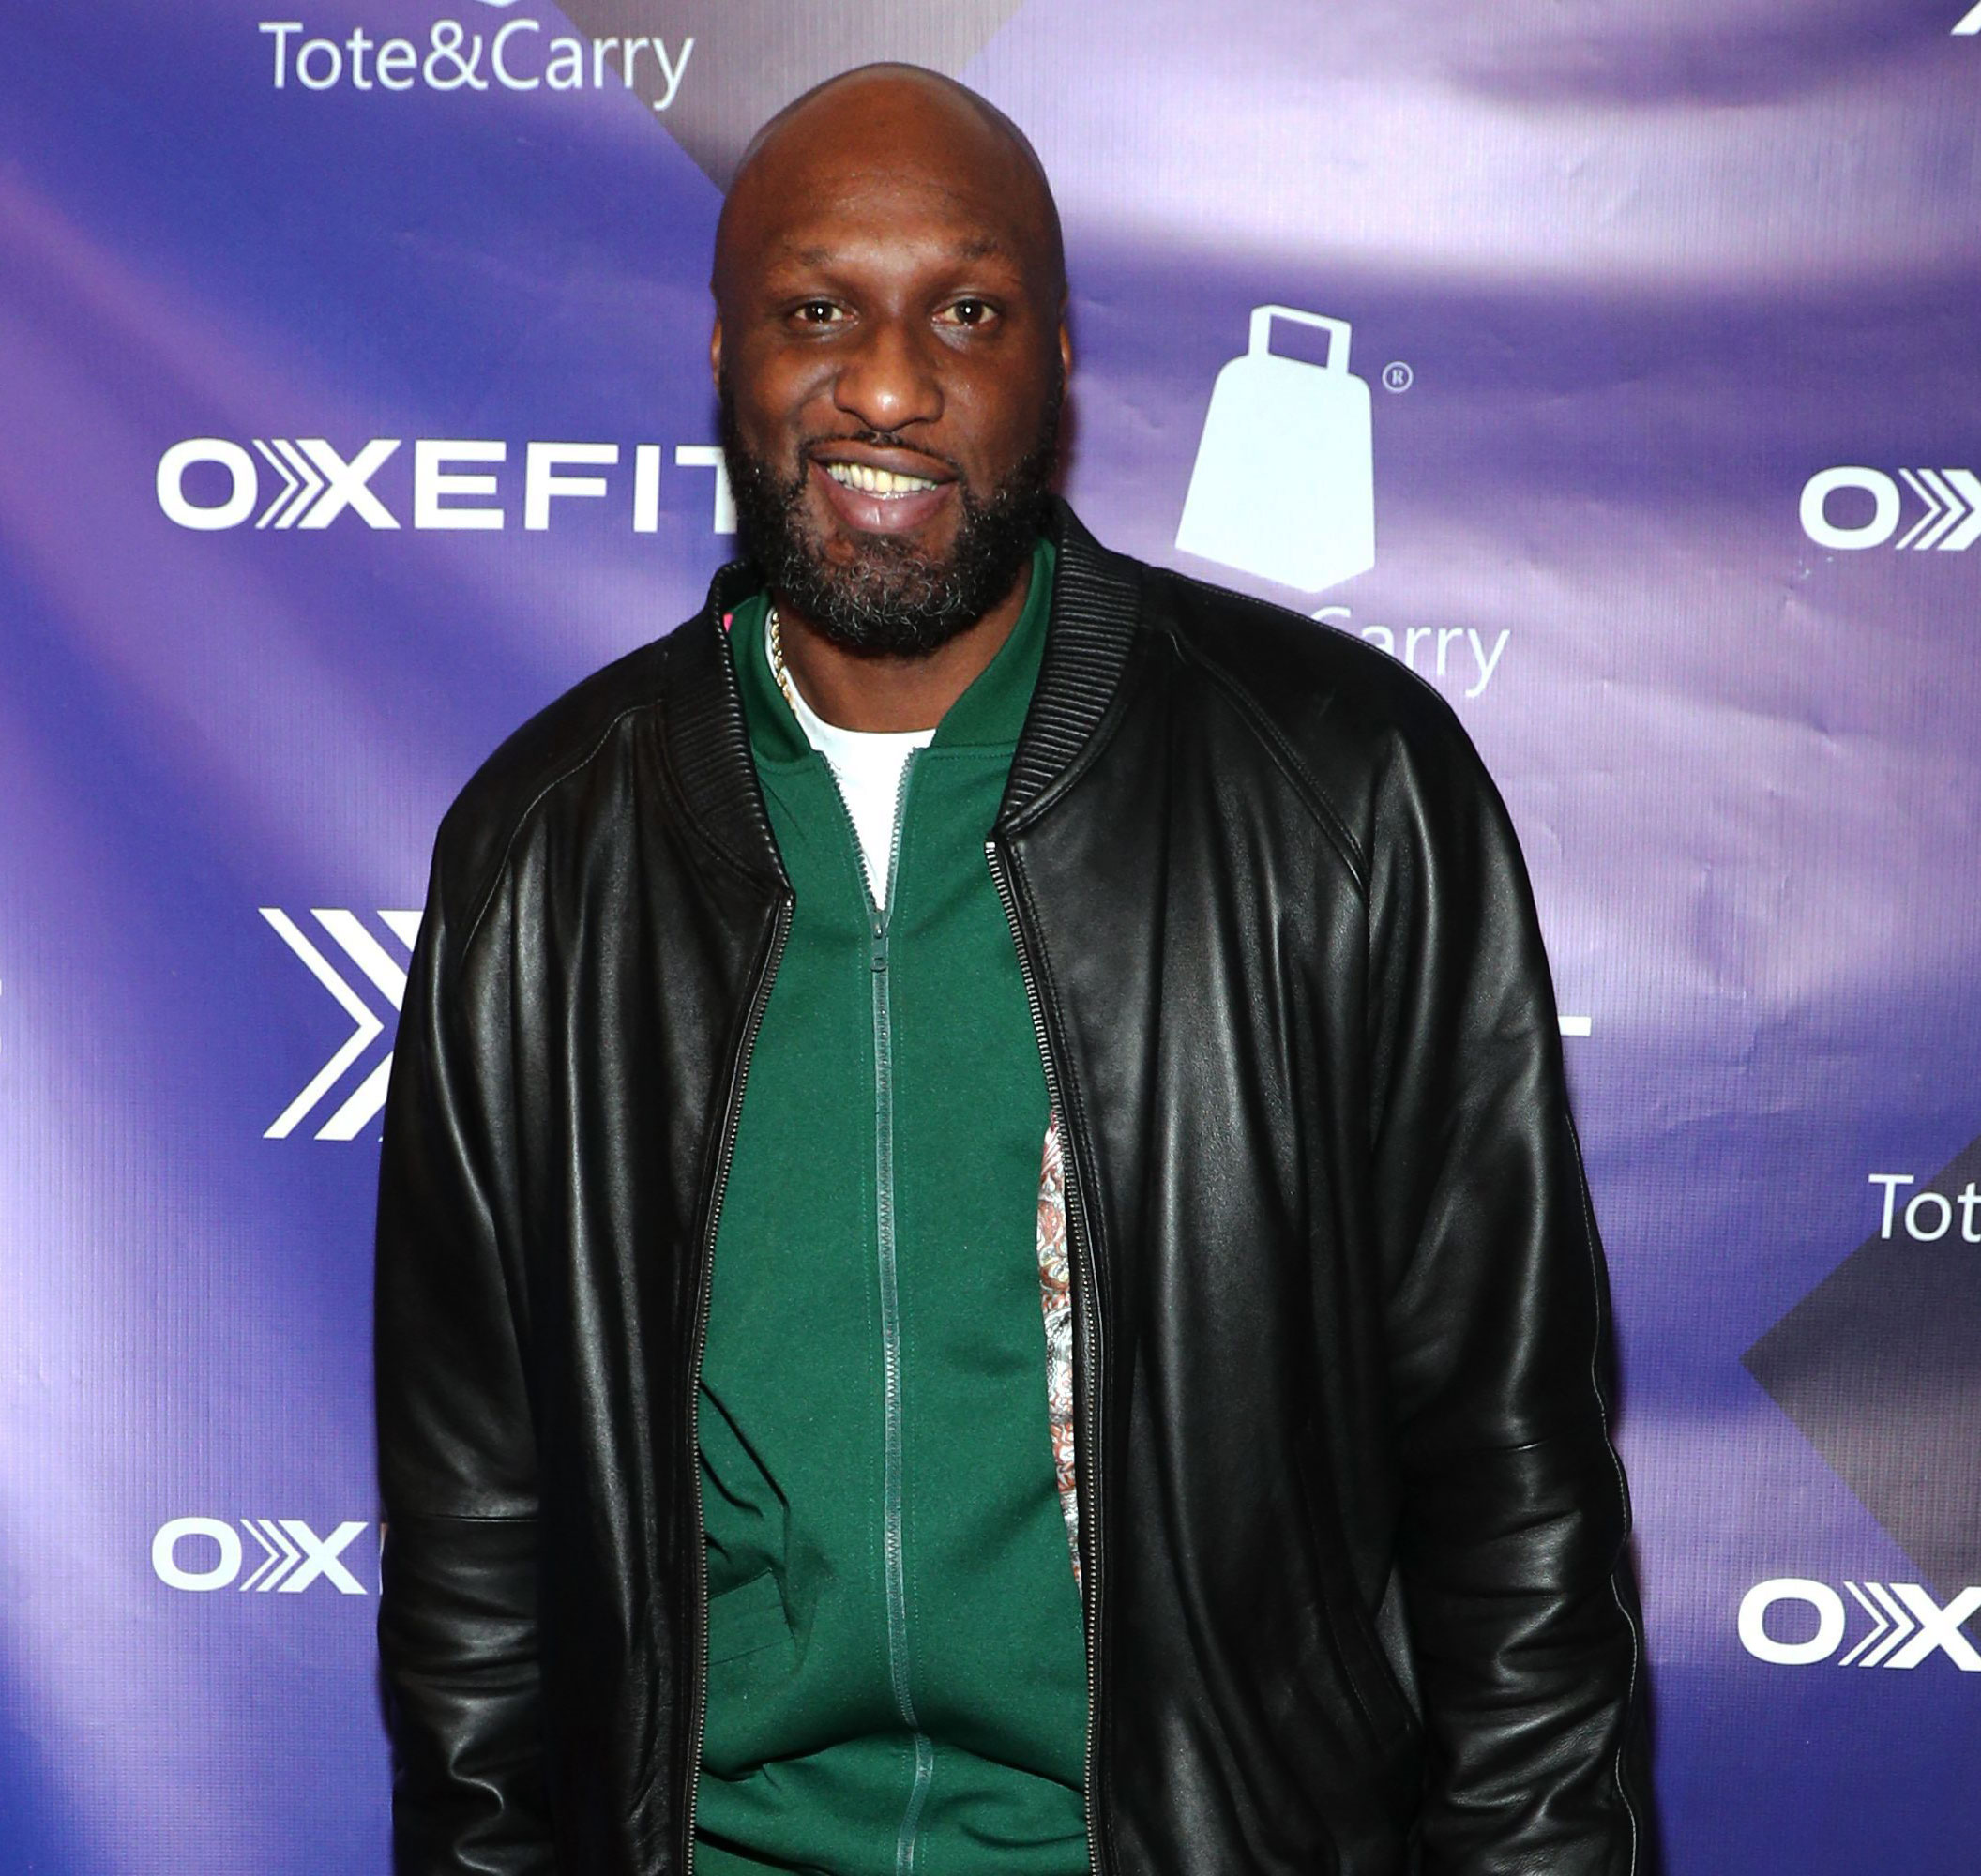 Lamar Odom Im Too Shy to Ask Ex Khloe Kardashian to Dinner picture picture